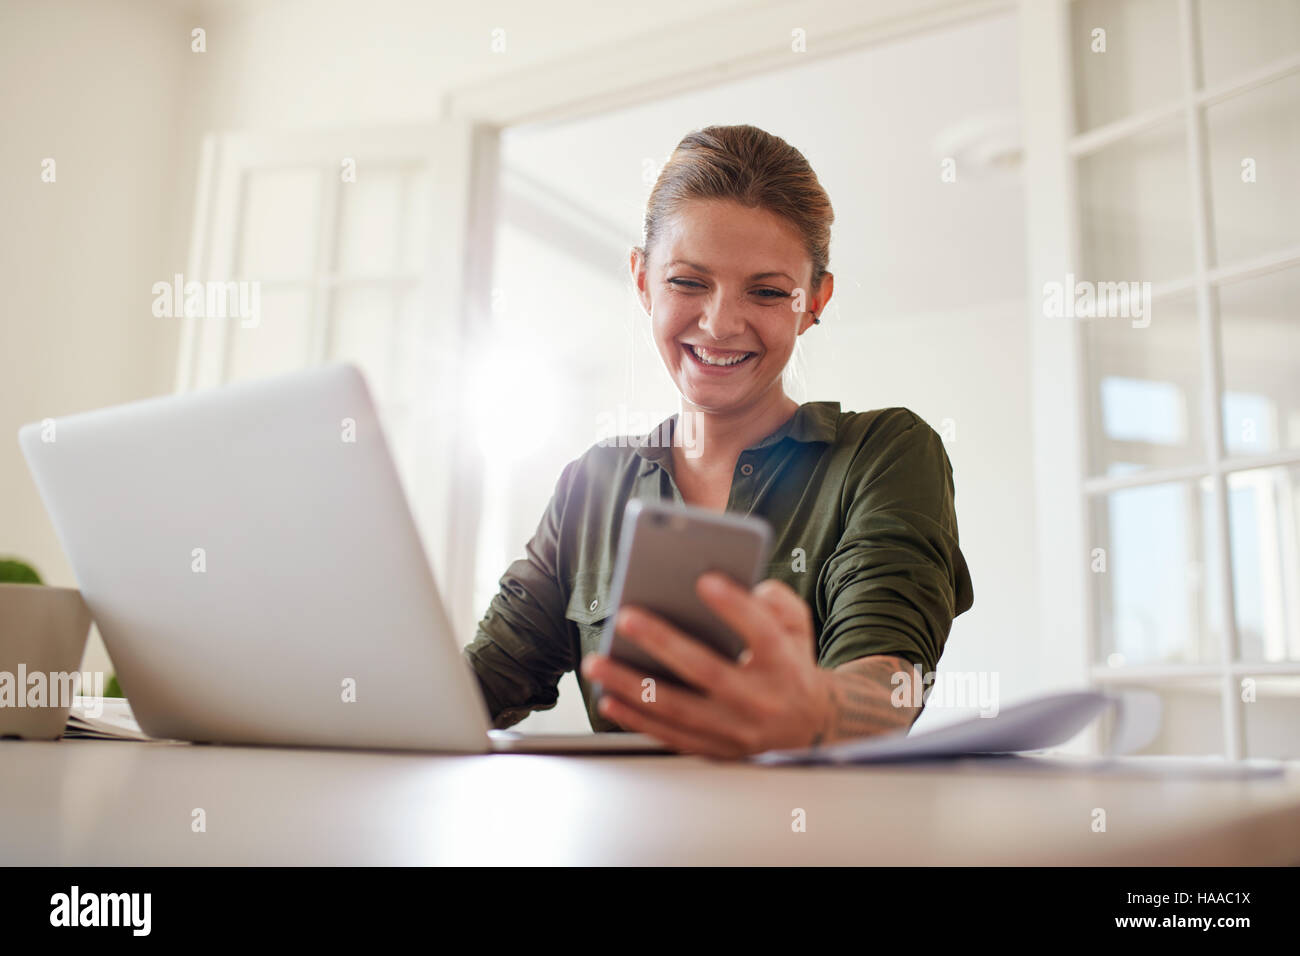 Shot of happy young woman using mobile phone while working on laptop. Female reading text message on her smart phone and smiling. Stock Photo